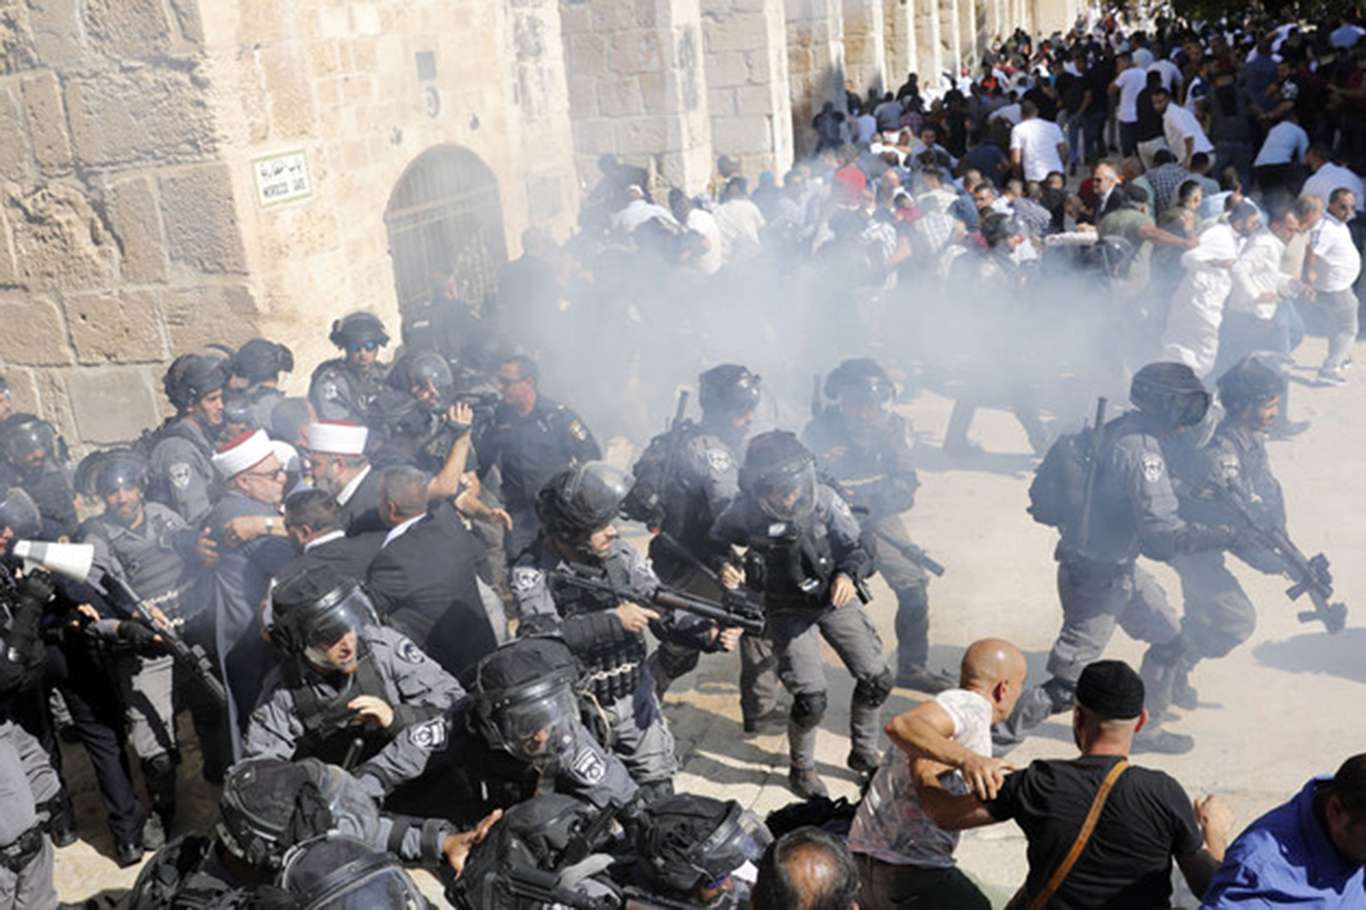 More than 300 injured as Zionist forces attack Palestinian worshipers at Al Aqsa Mosque